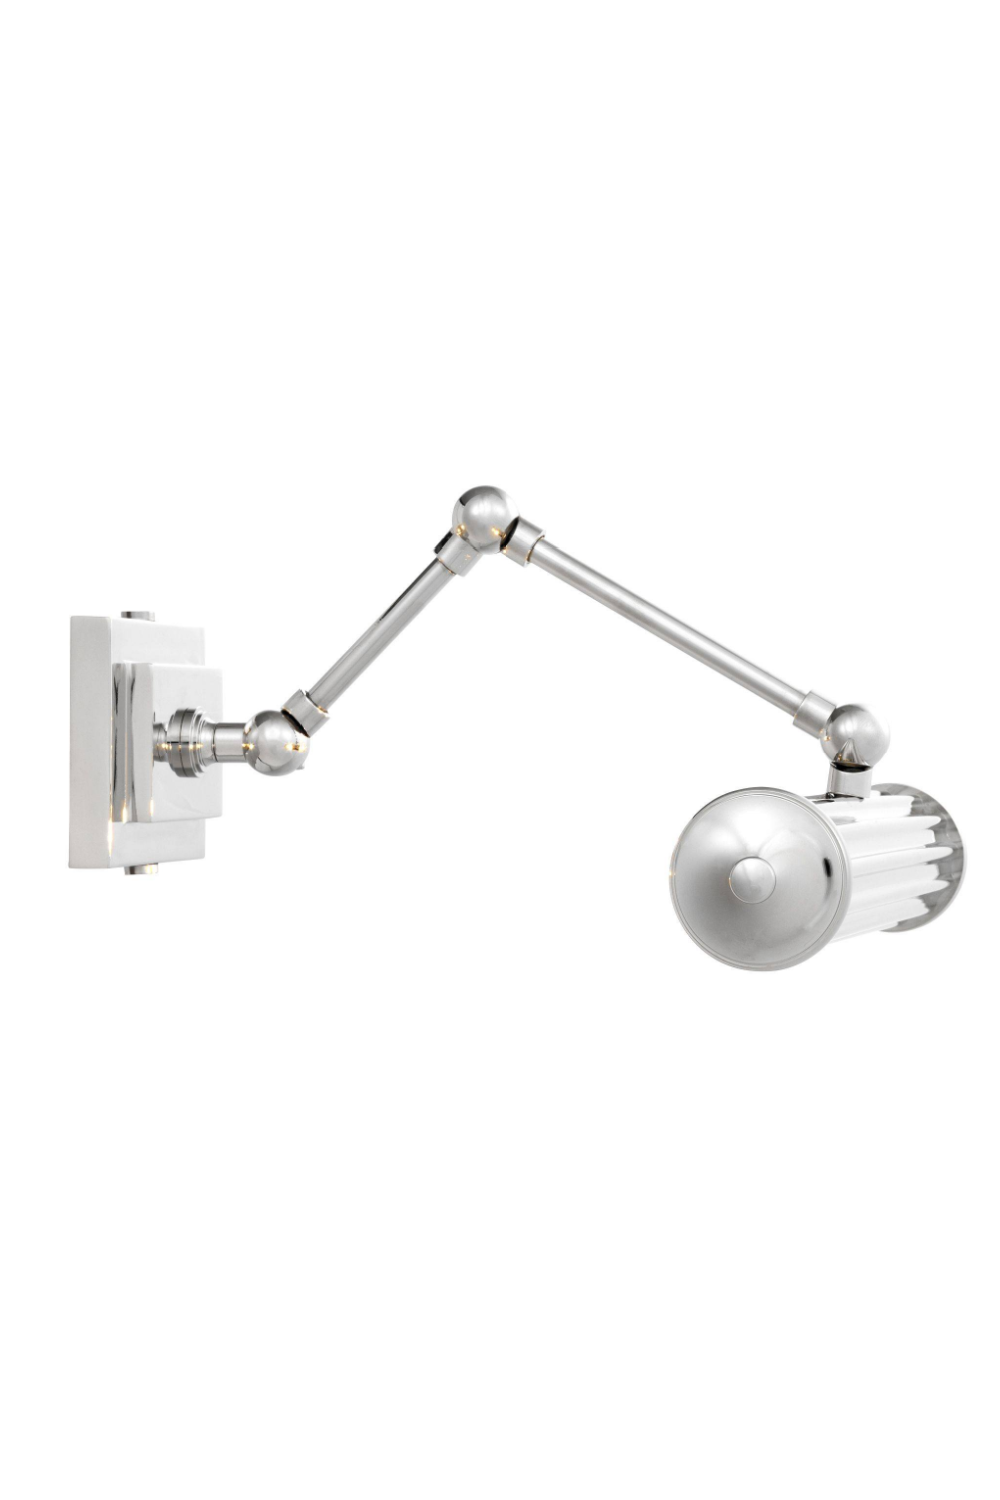 Silver Picture Wall Lamp - S | Eichholtz Luca | OROA